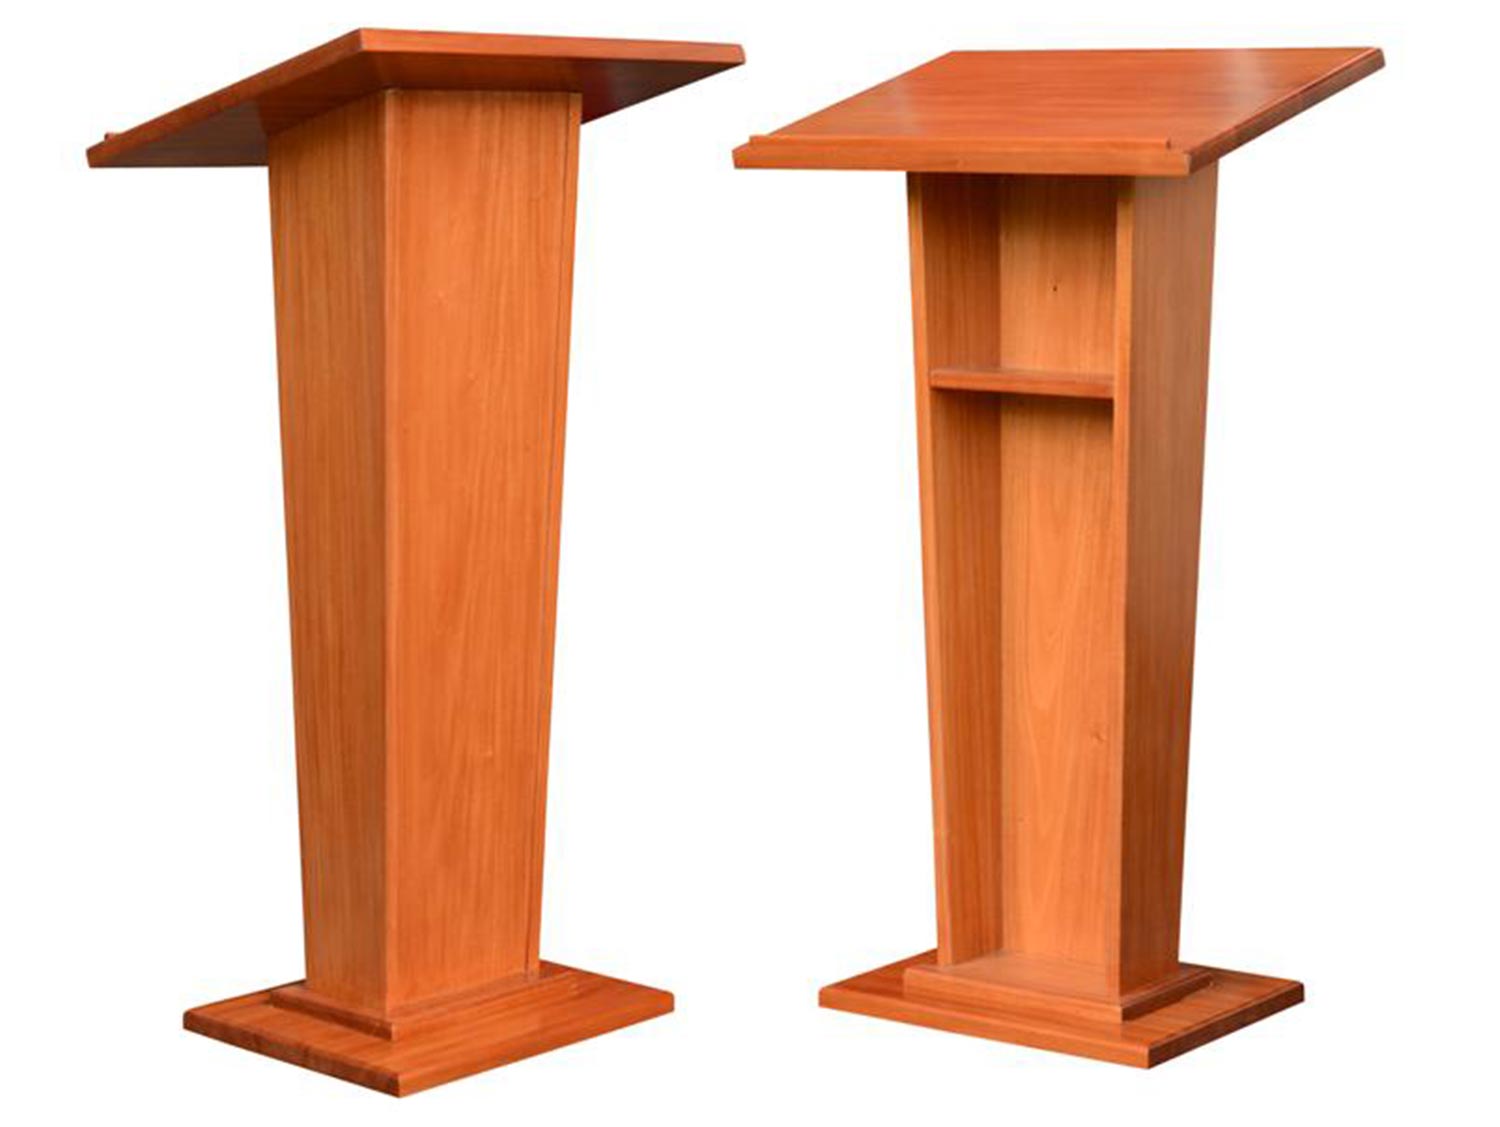 Wooden Podium for Conferences